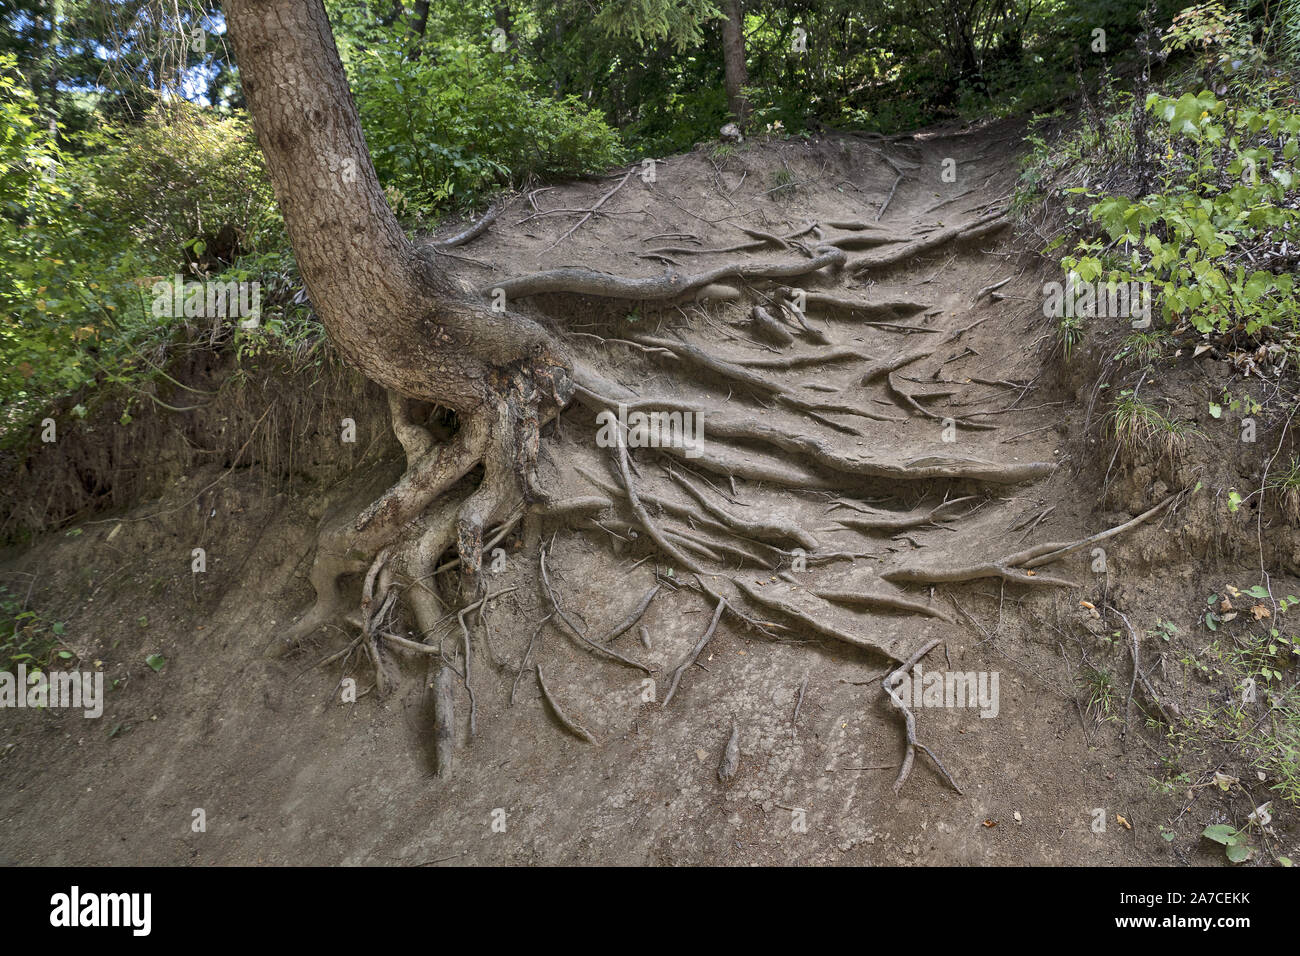 Georgia: old tree with bizarre roots Stock Photo